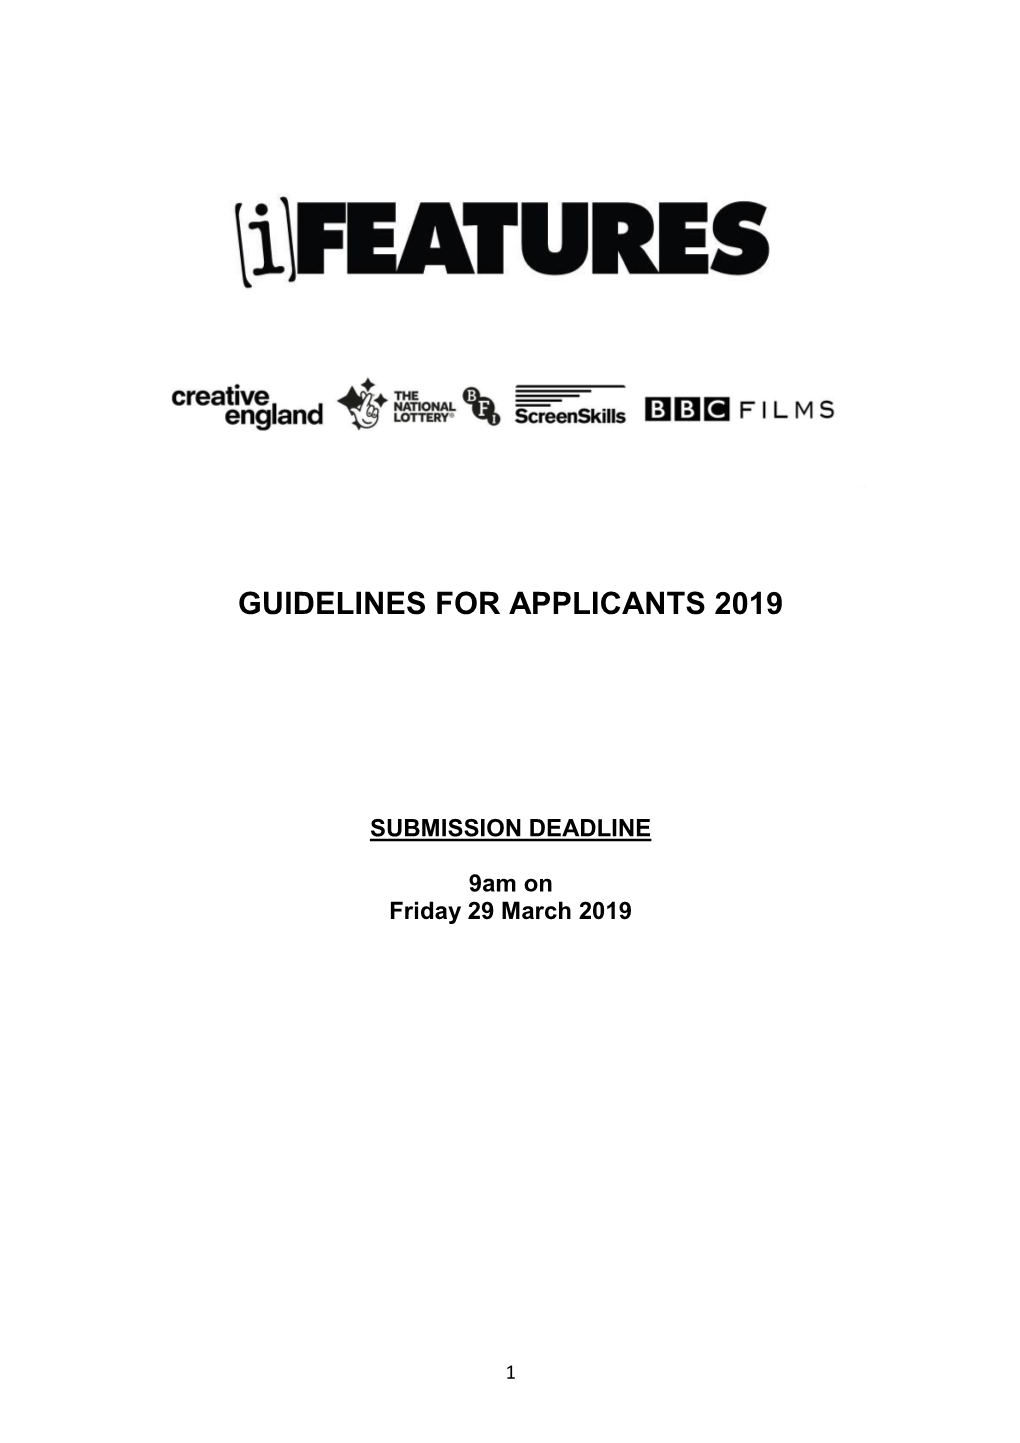 Guidelines for Applicants 2019